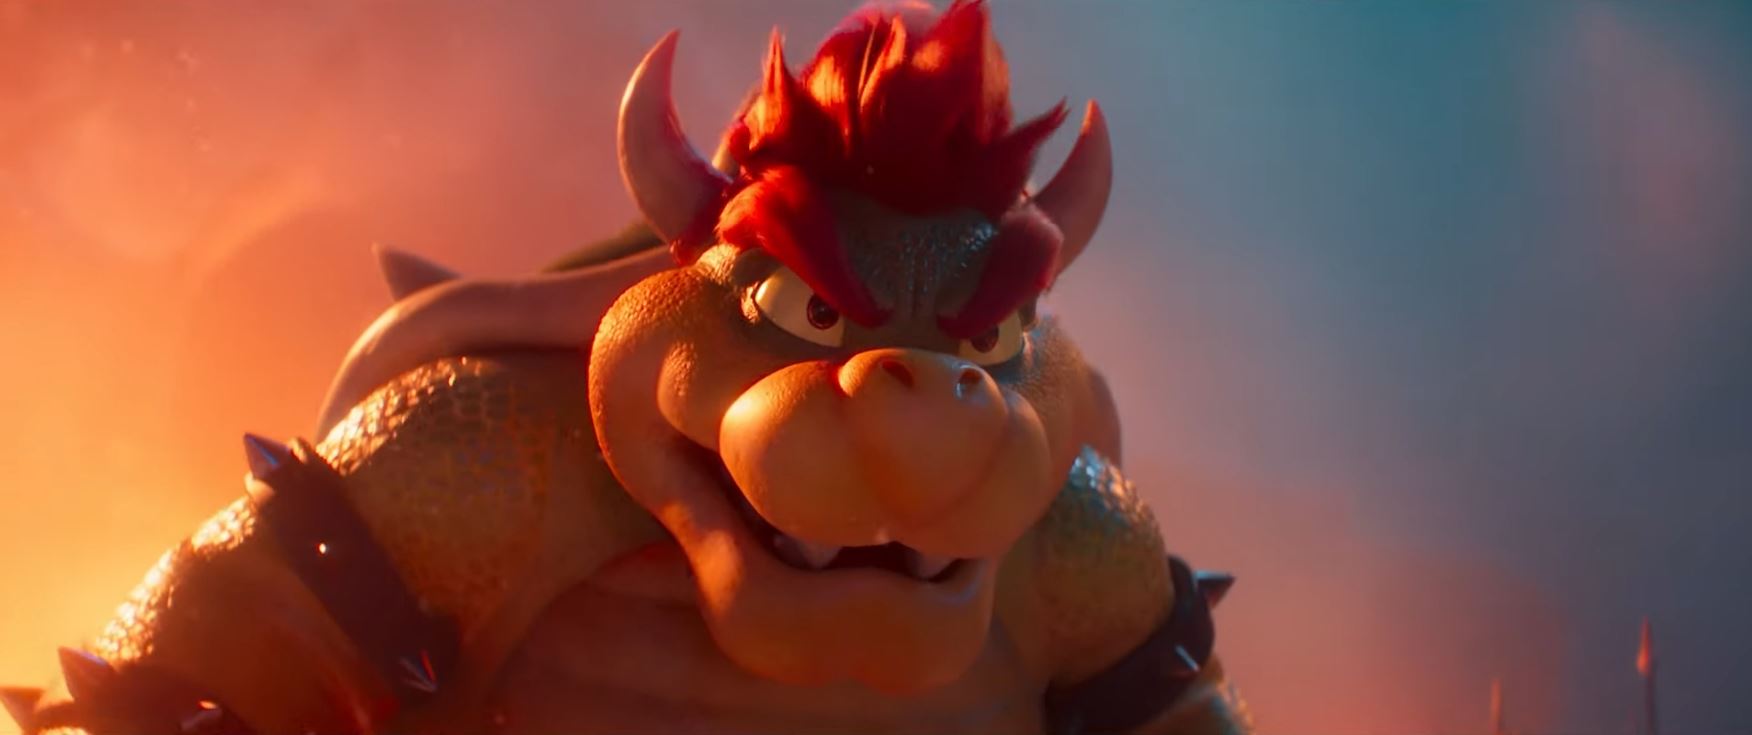 Bowser attacks in The Super Mario Bros. Movie's first trailer